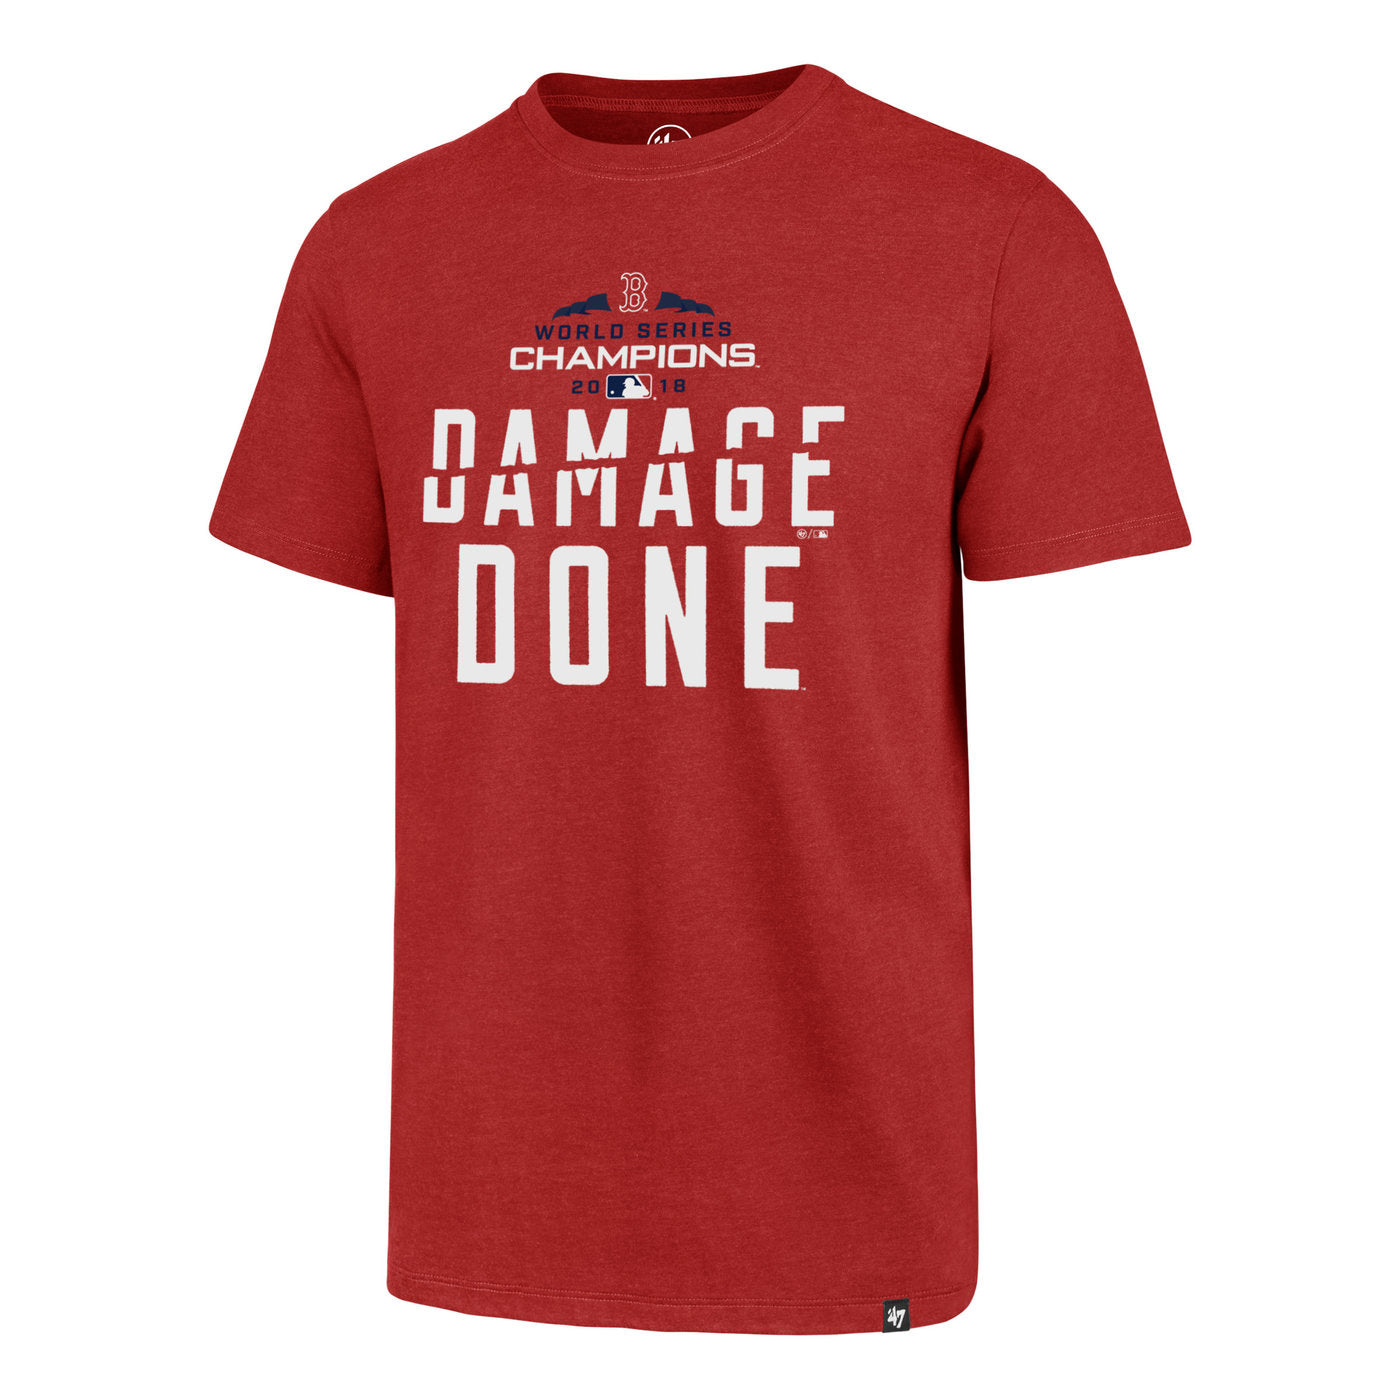 Boston Red Sox Damage Done World Series Champions Men's T-shirts - Red